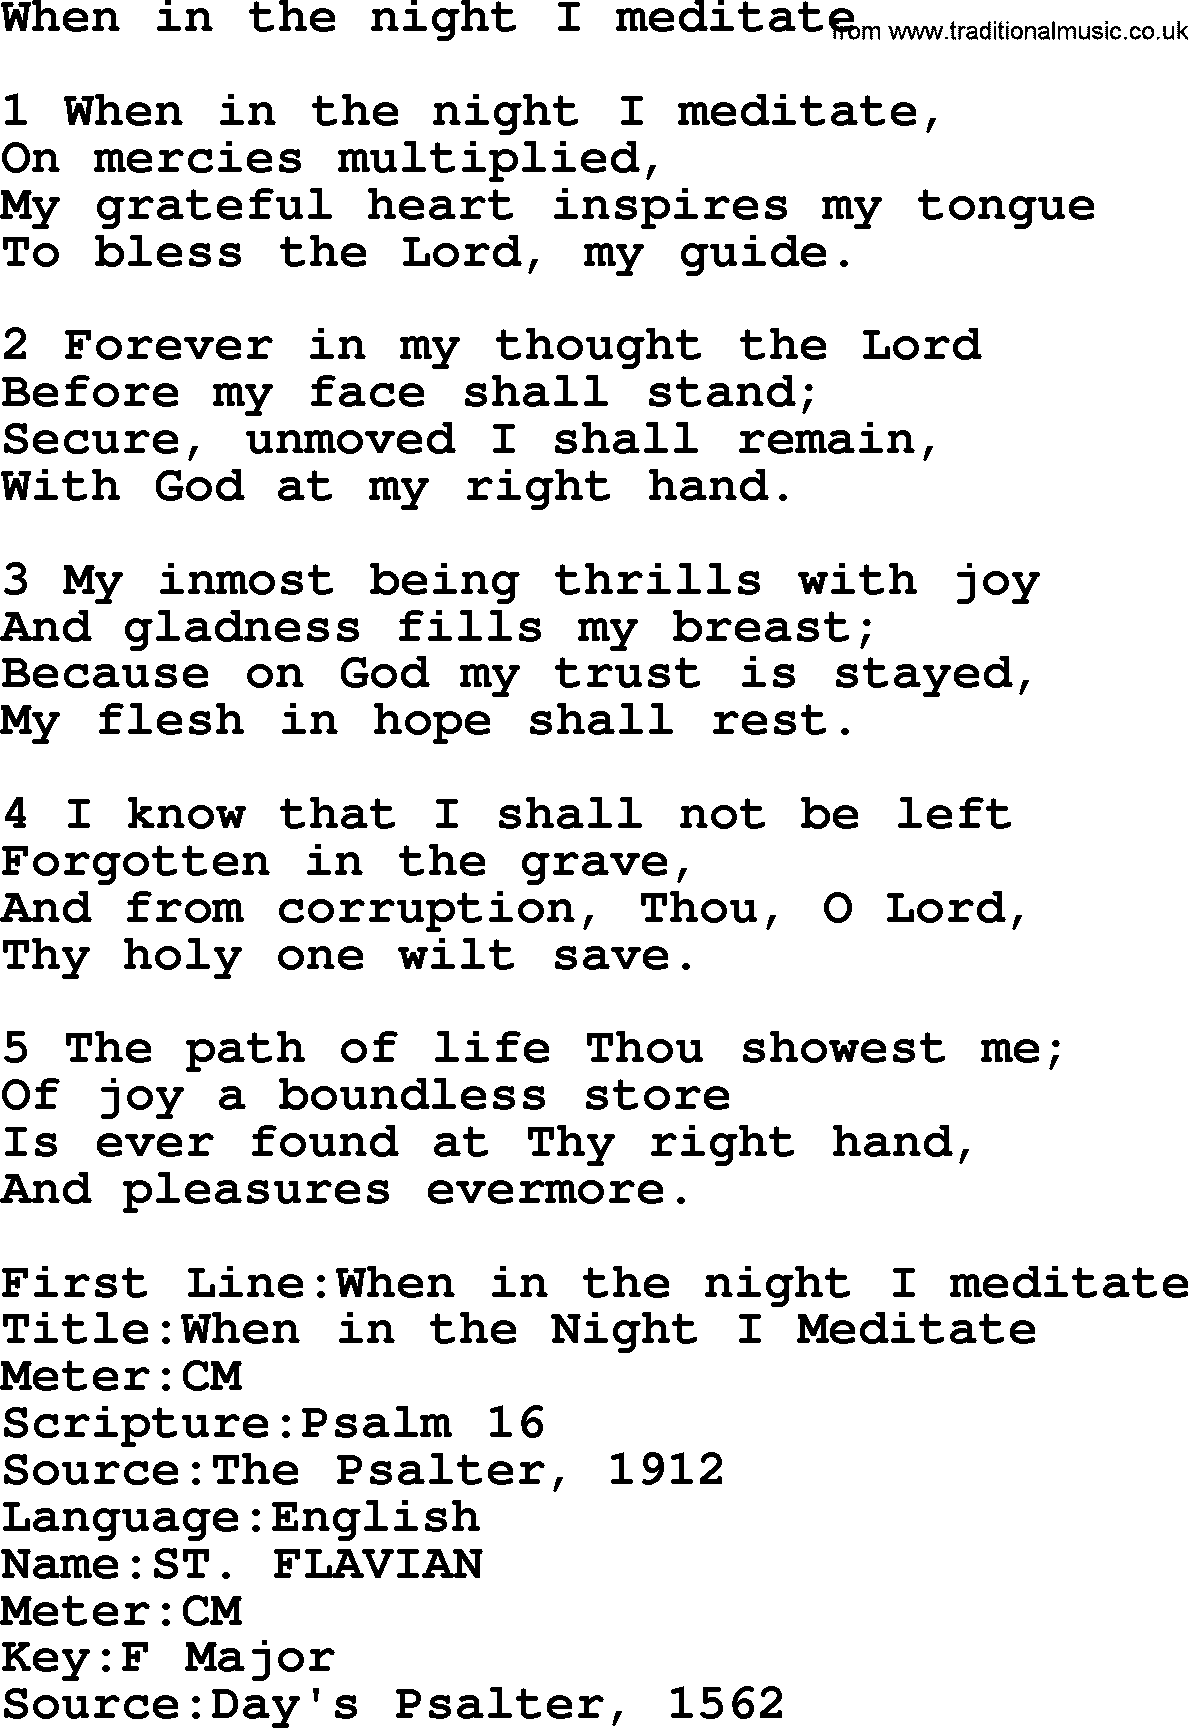 Presbyterian Hymns collection, Hymn: When In The Night I Meditate, lyrics and PDF